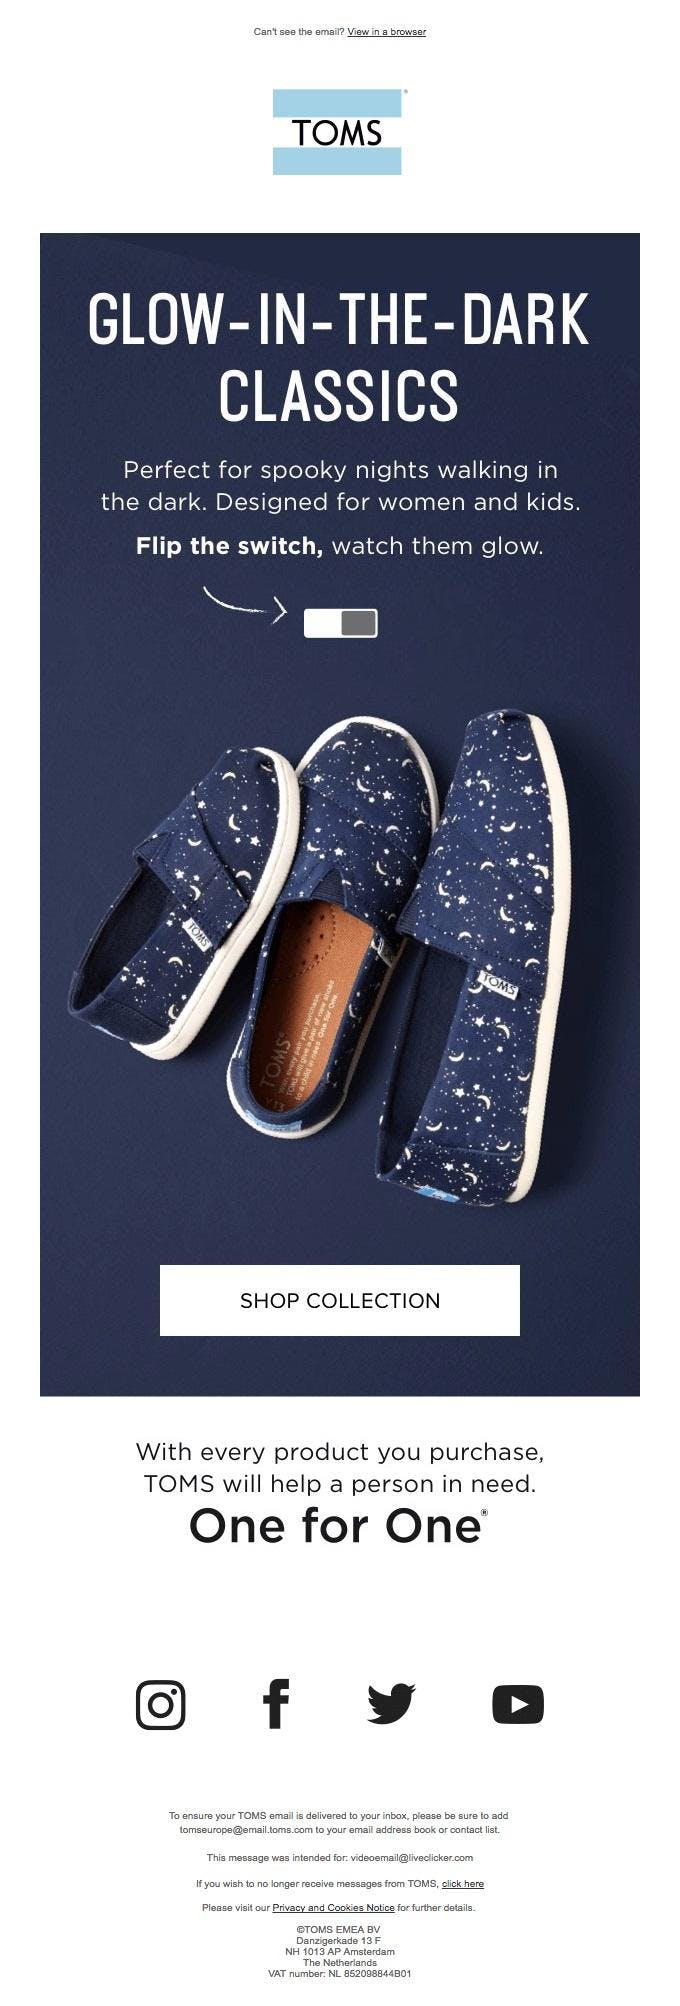 This email from Toms, for example, contains an interactive yet responsive image.